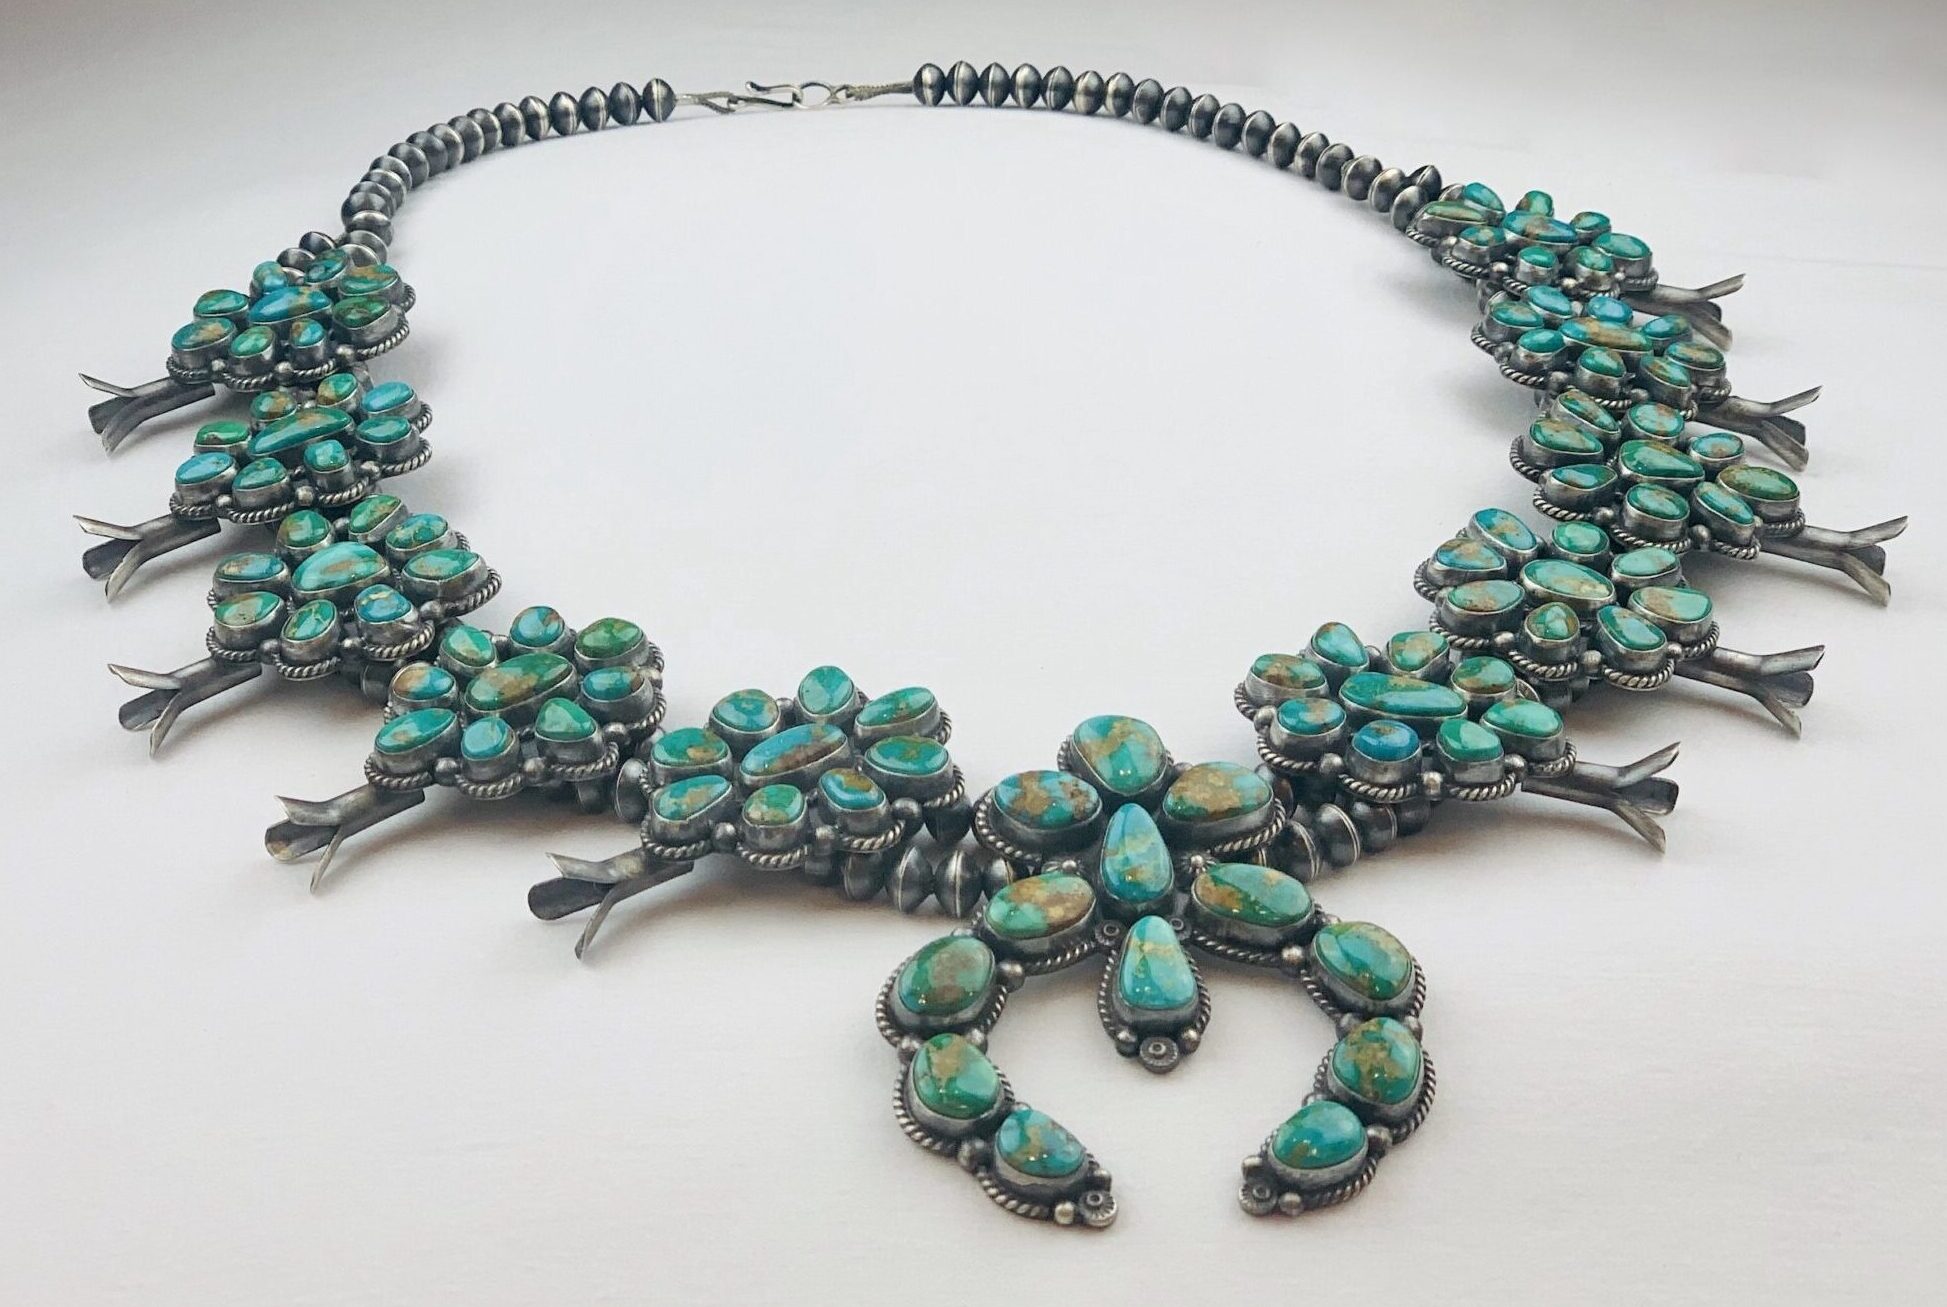 Wide Selection of Turquoise Jewelry